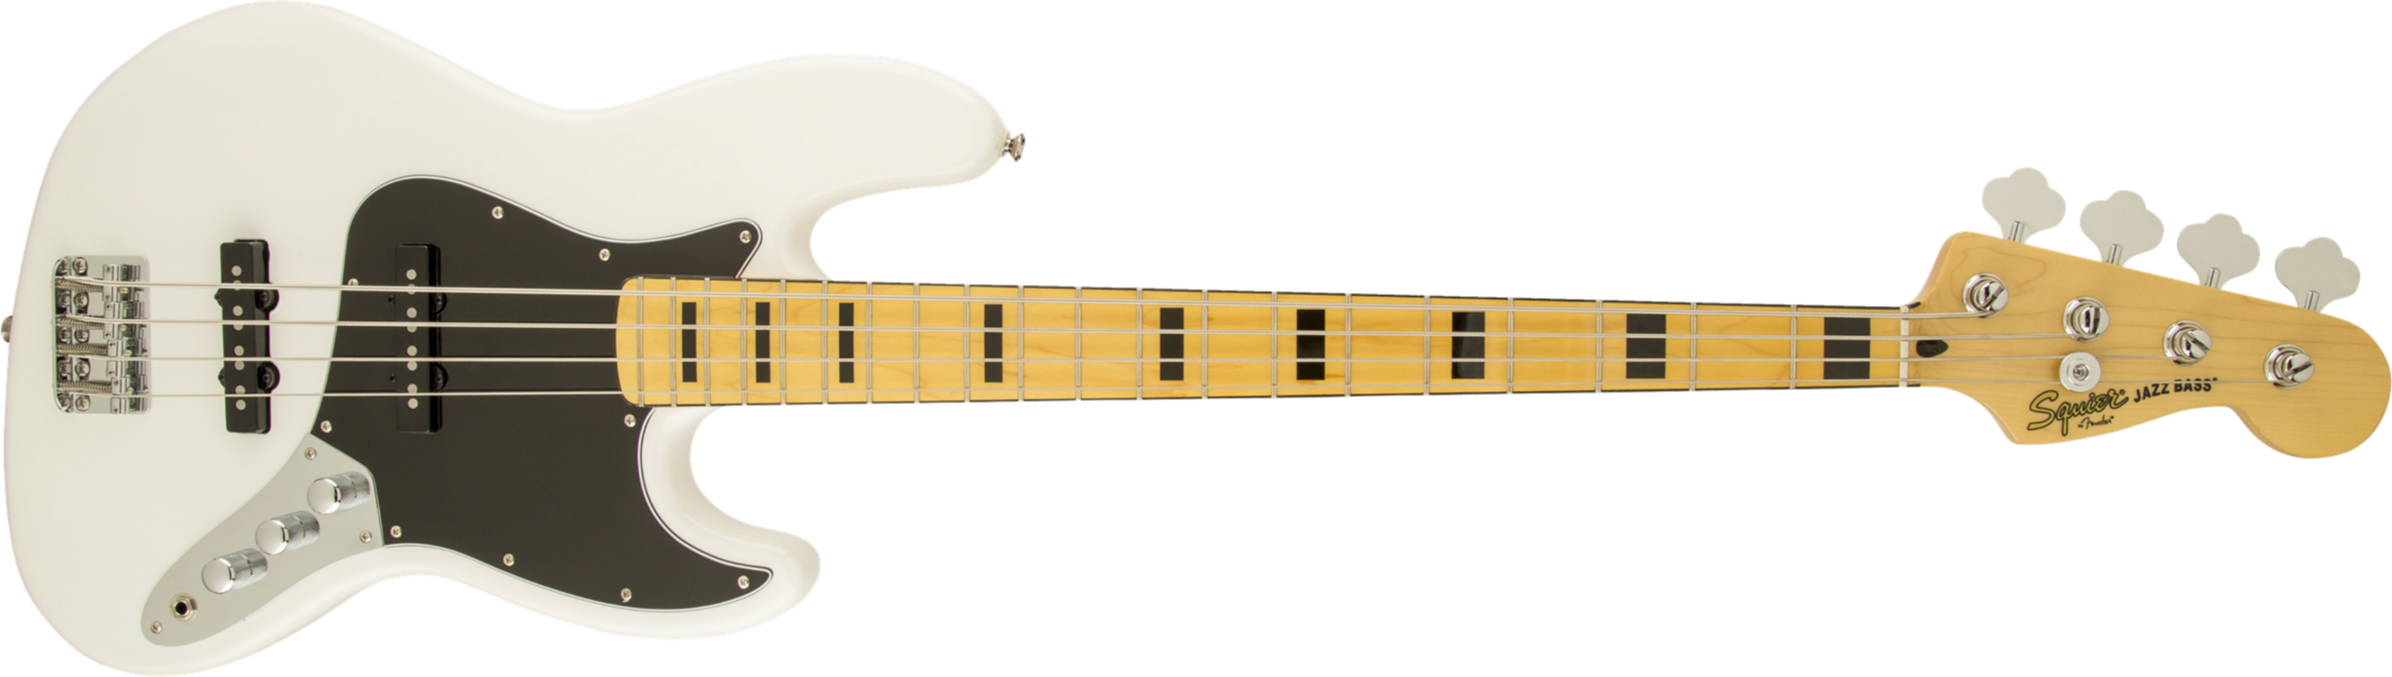 Squier Jazz Bass Vintage Modified 70 2013 Mn Olympic White - Basse Électrique Solid Body - Main picture